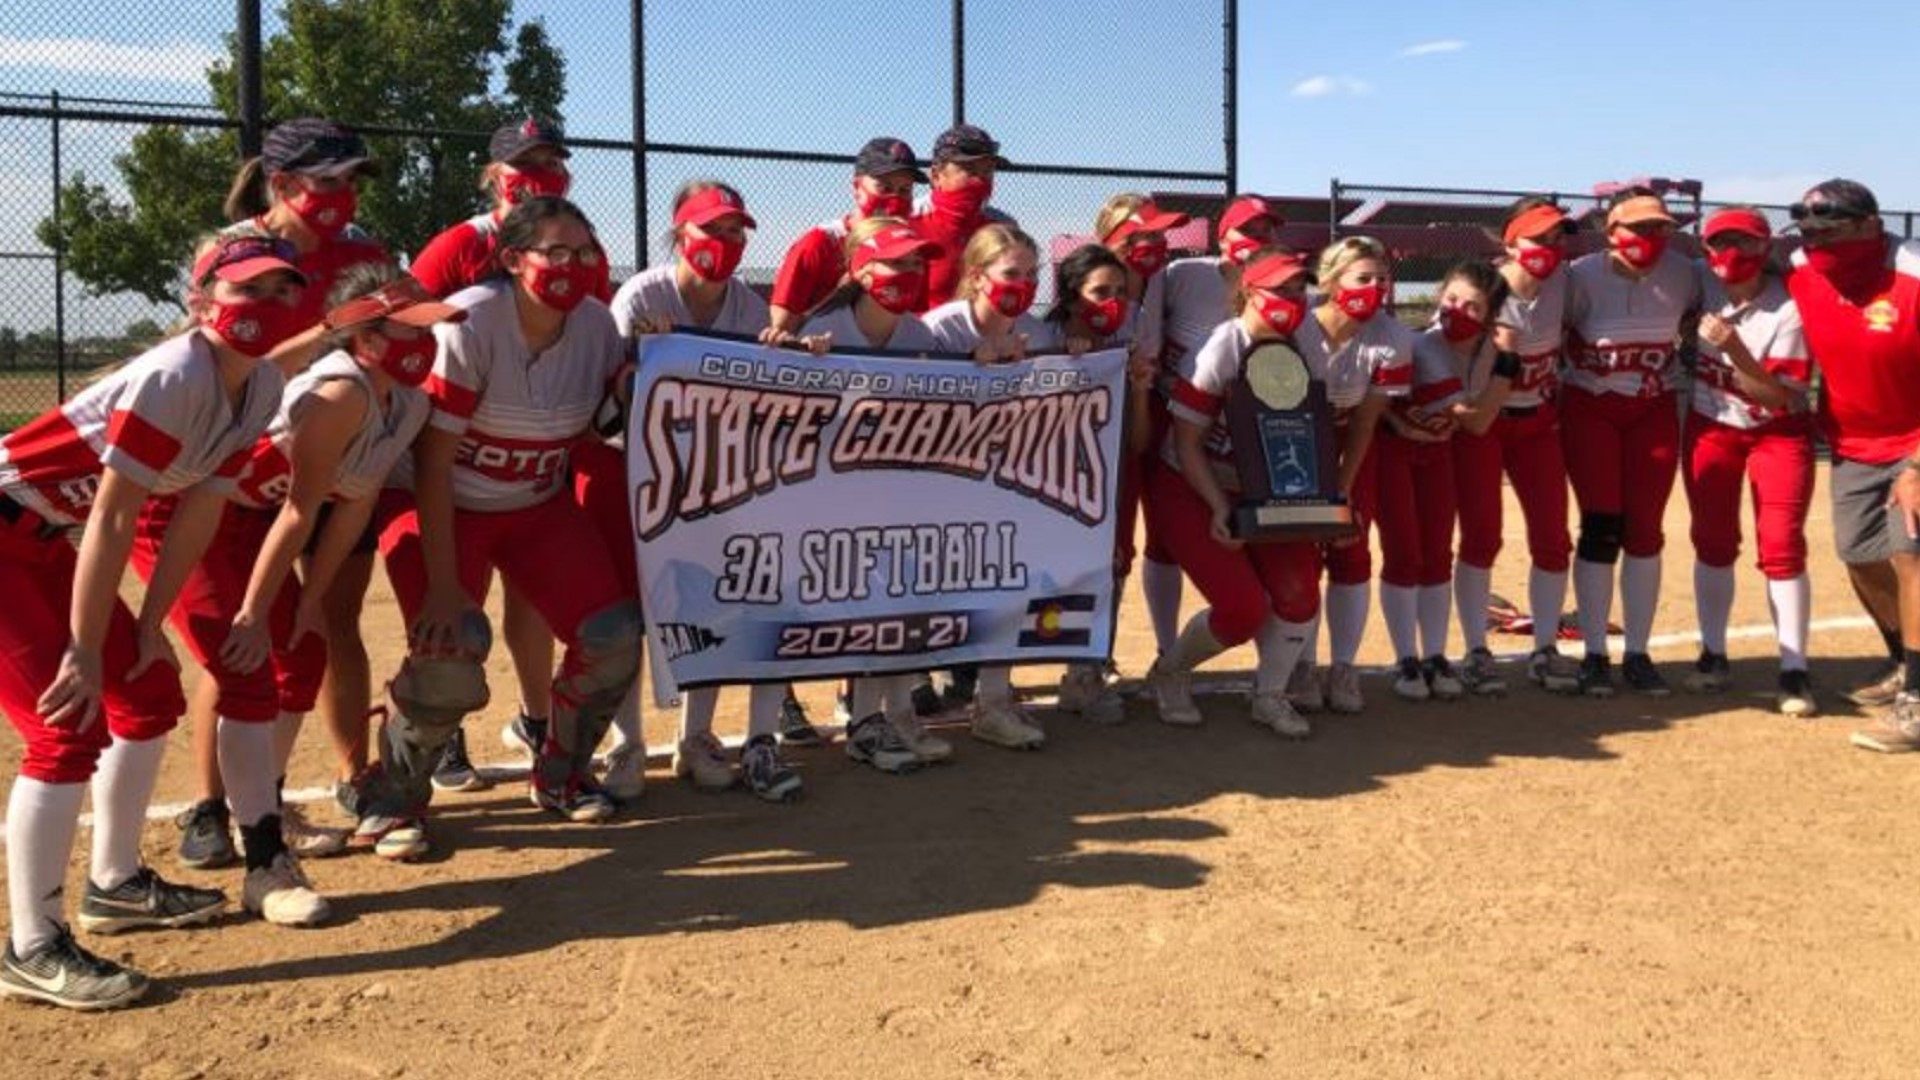 The Reds returned to state for the second time in three years, but this time, they left with the hardware. Eaton beat Lutheran 5-1 for the 3A state softball title.